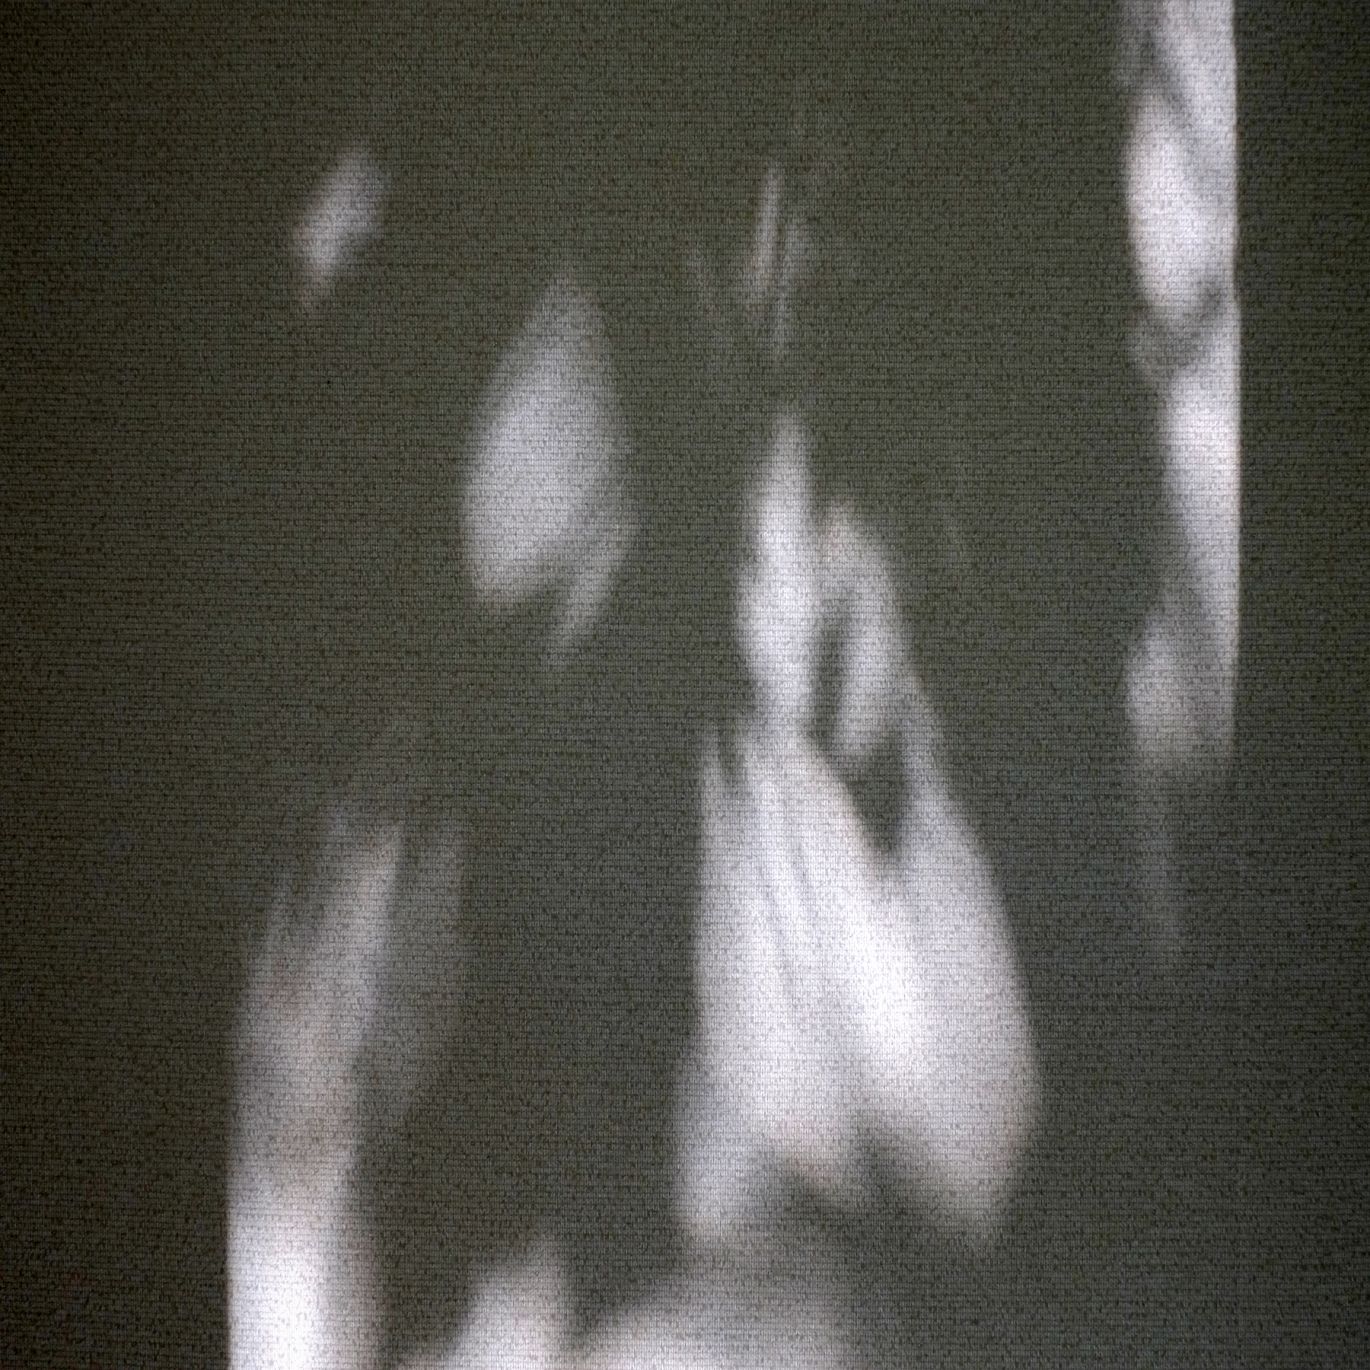 sombras